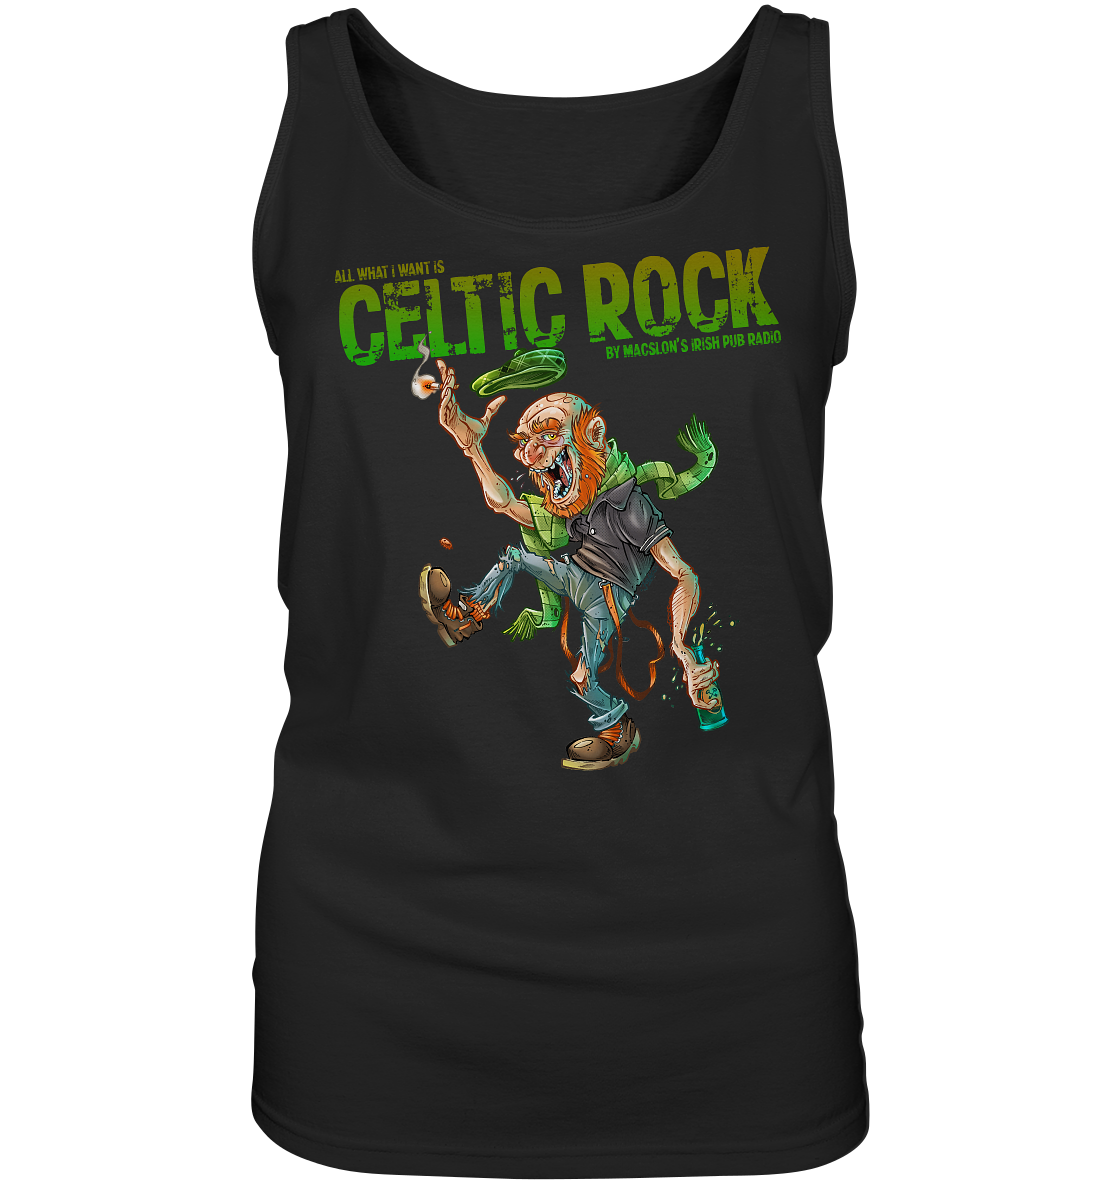 All What I Want Is "Celtic Rock" - Ladies Tank-Top